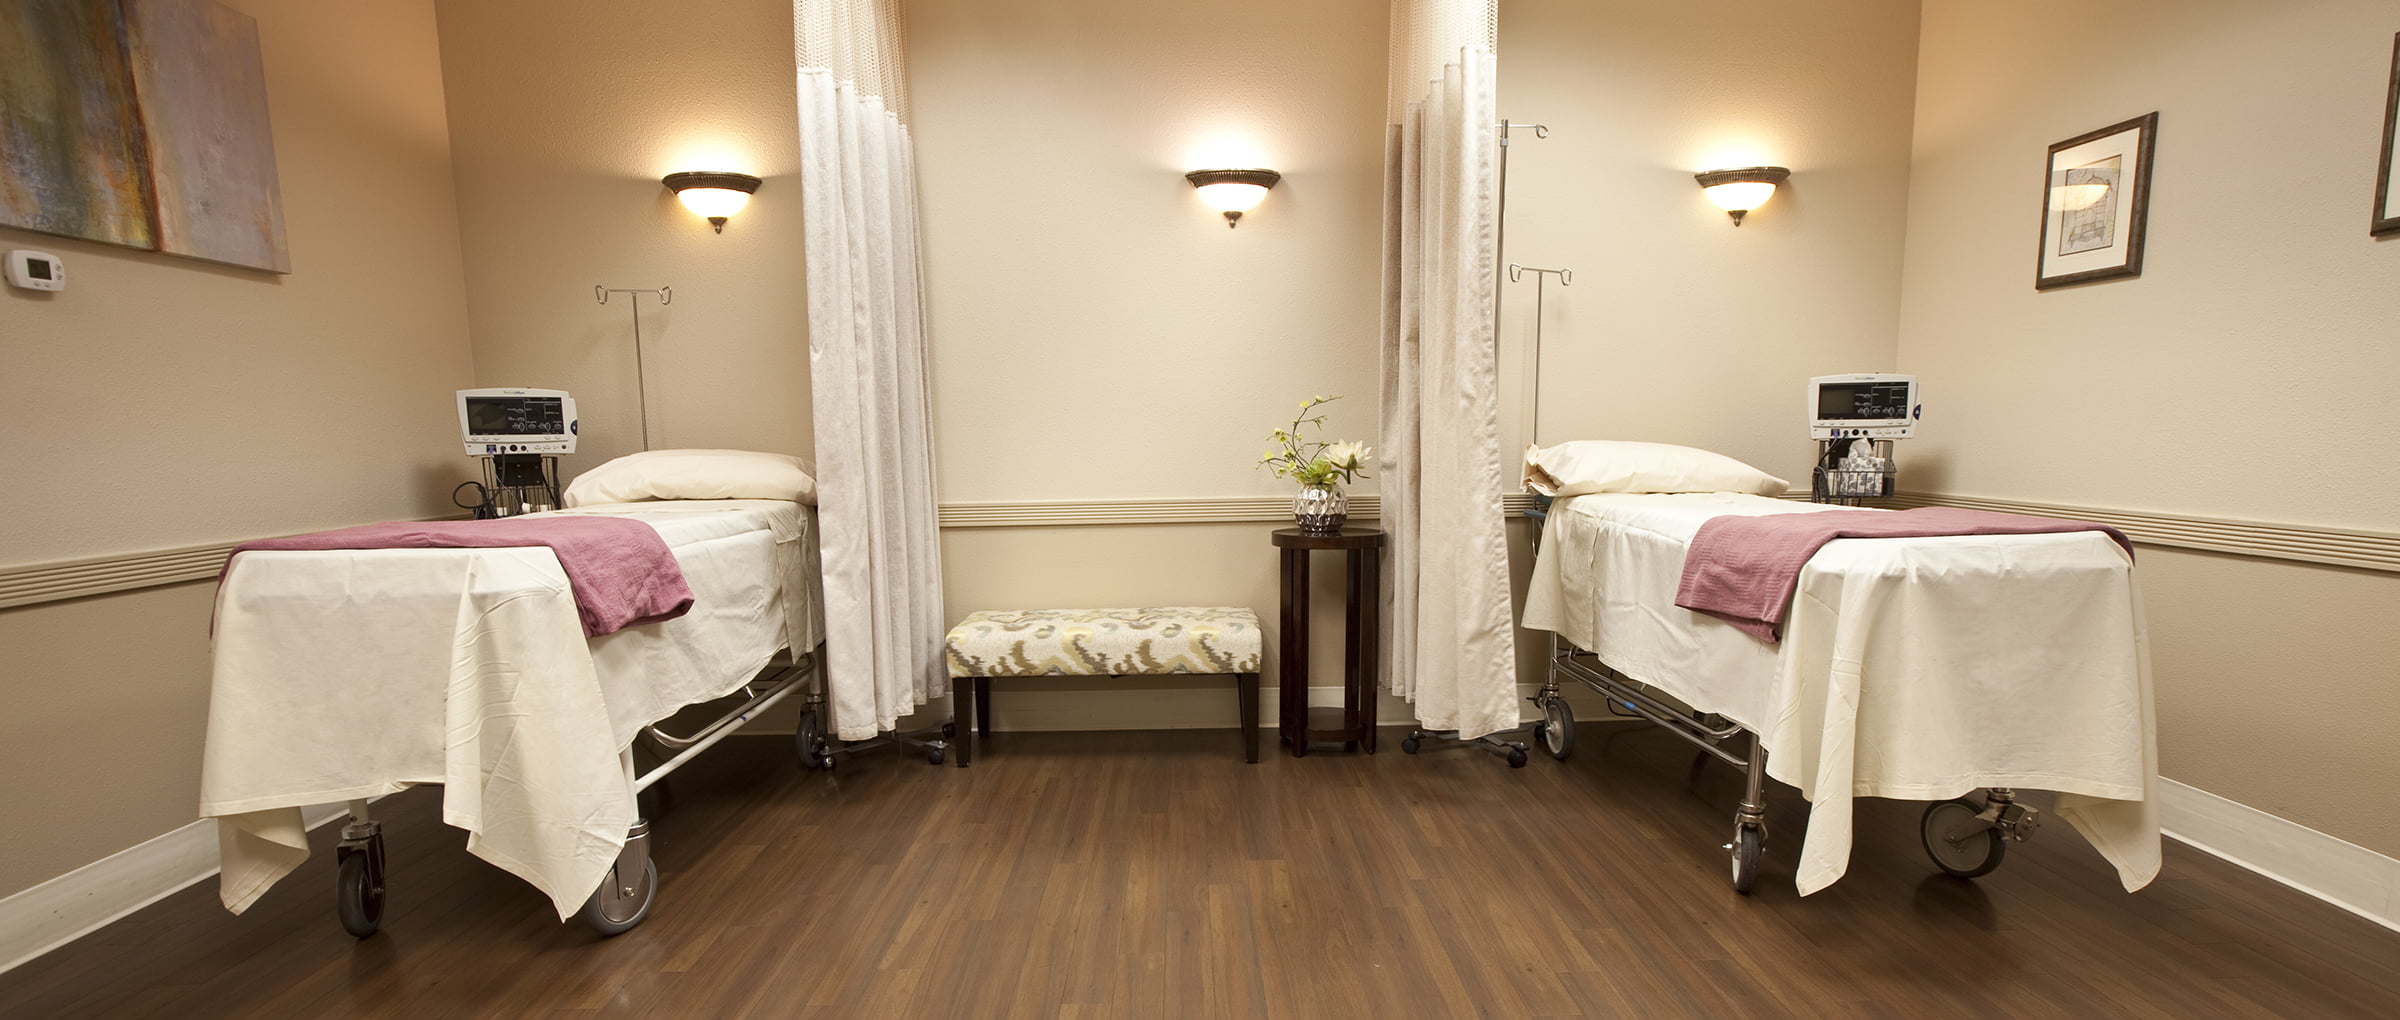 The Fertility Center of Las Vegas recovery room